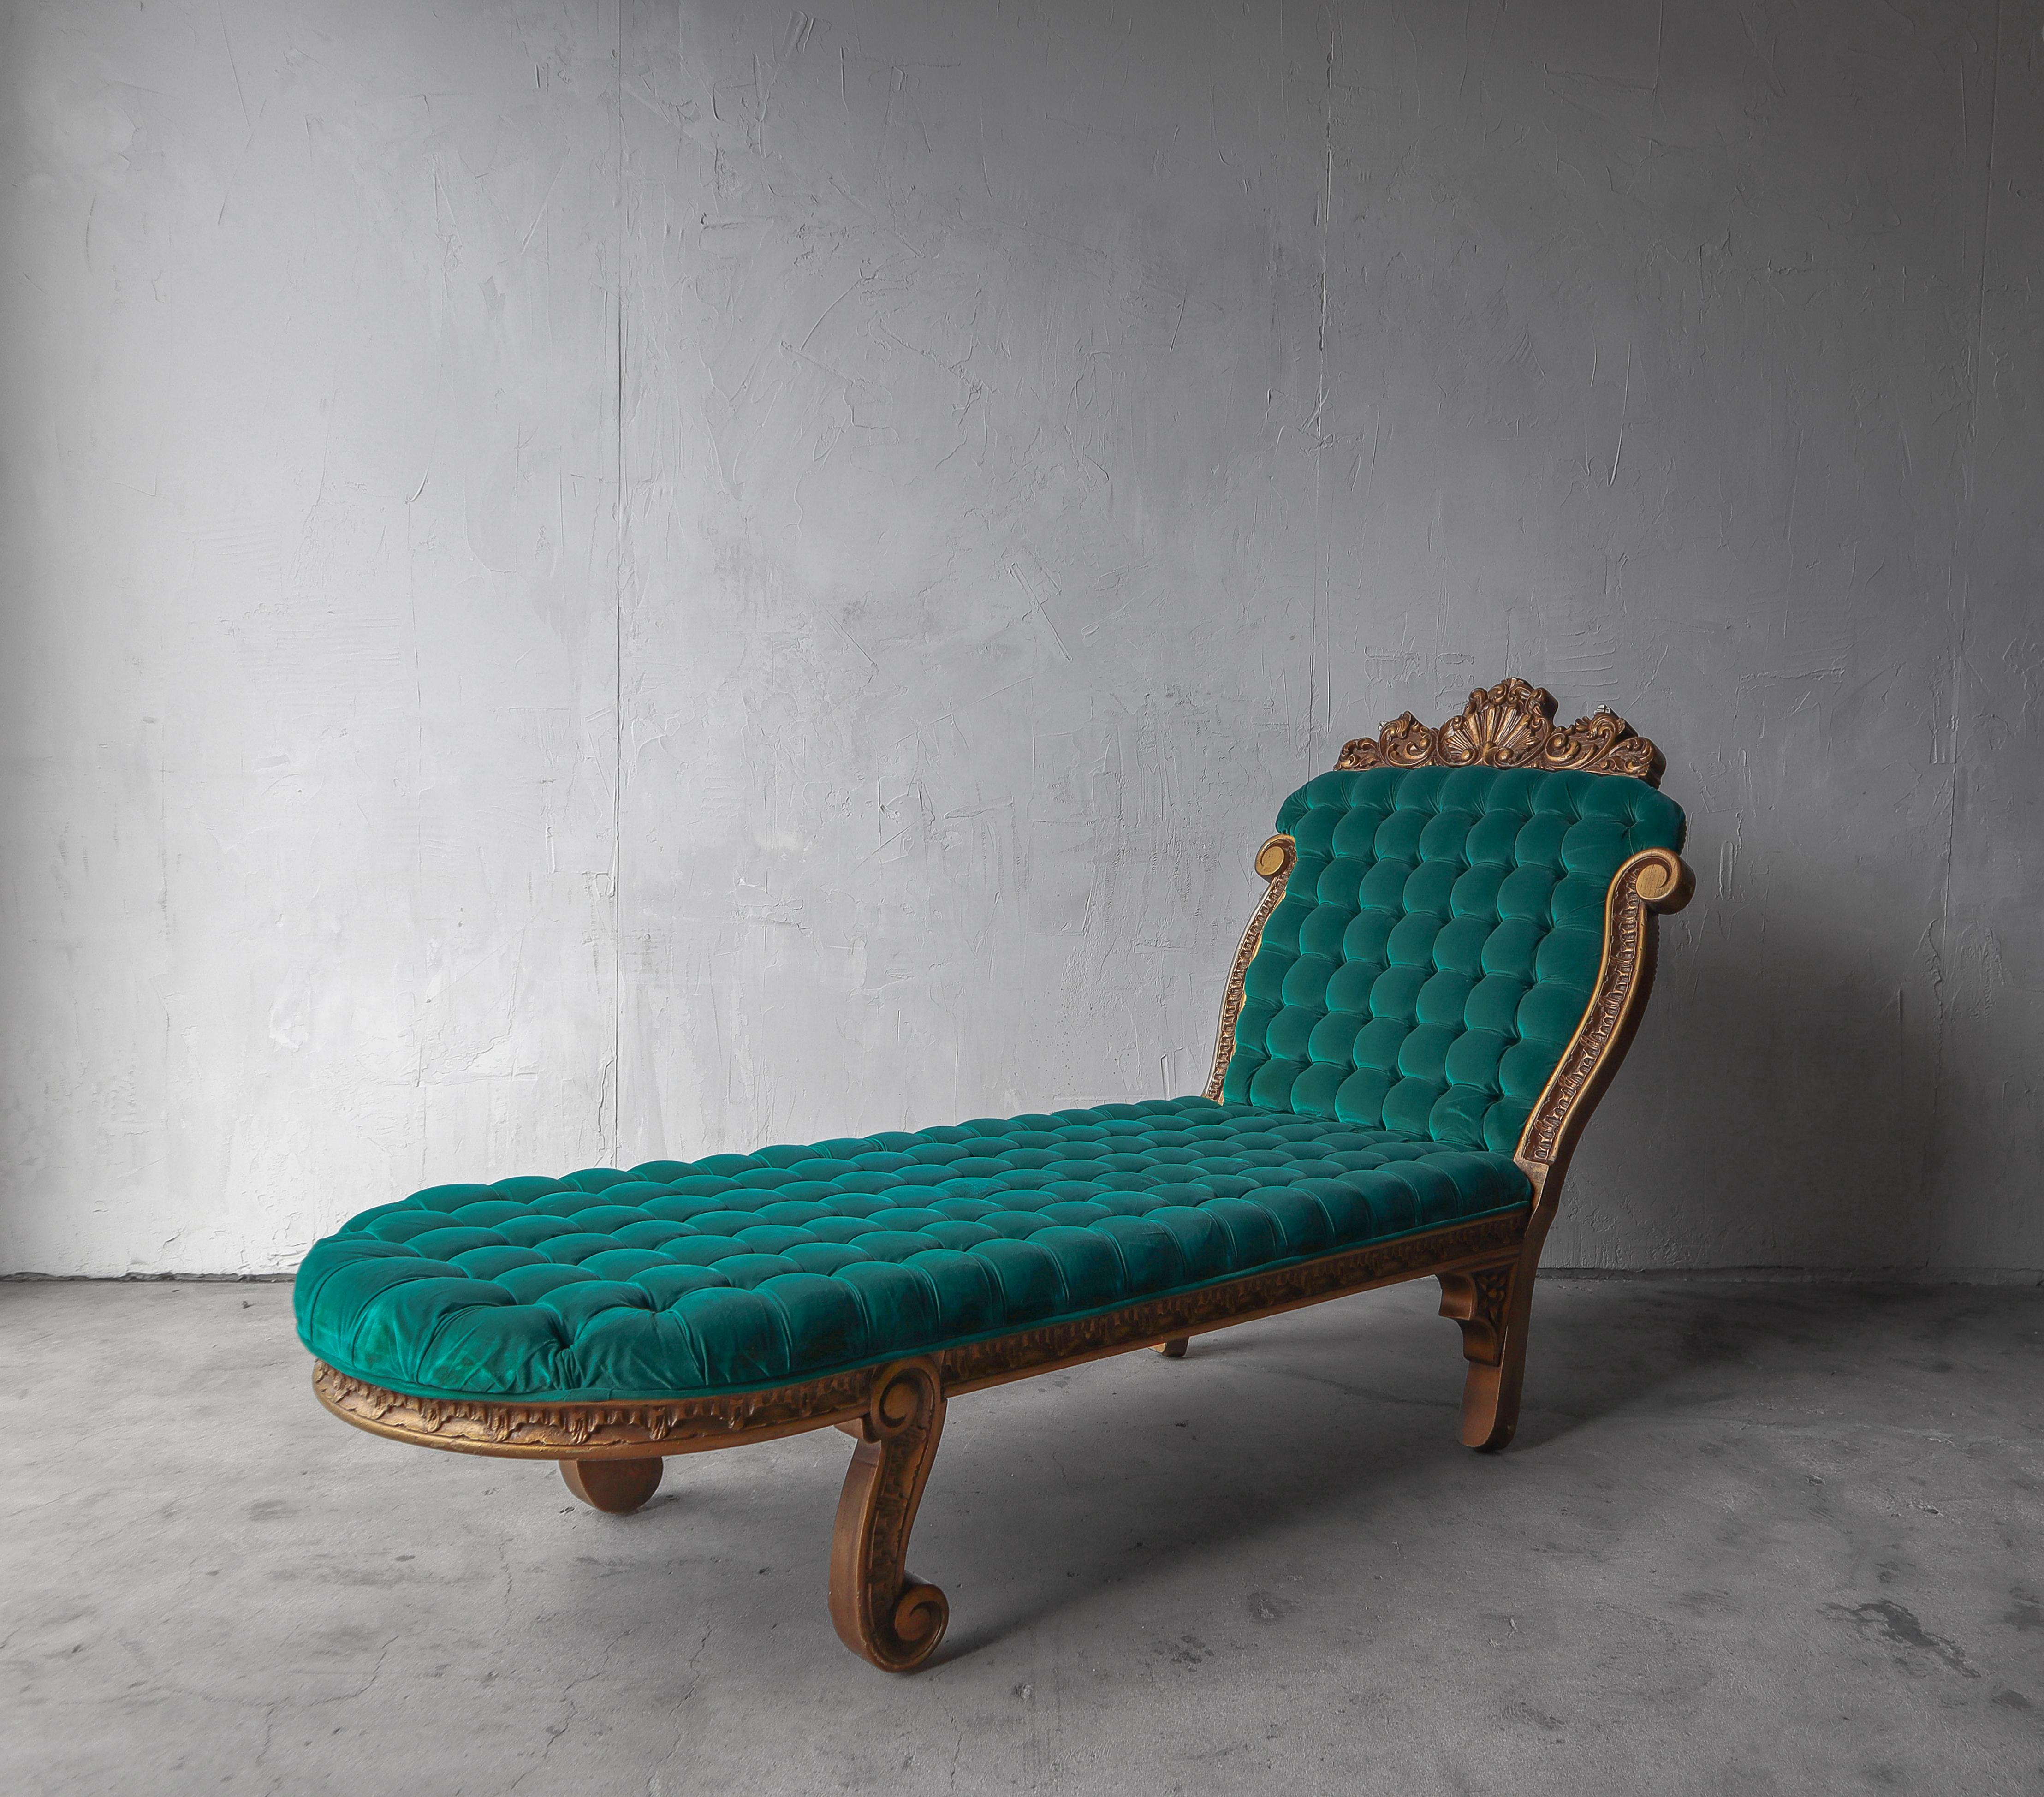 Beautiful Hollywood Regency style chaise lounge. Deep tufting and nice gold wood frame.

Perfect for your boudoir, daughters room, or even as a photography prop.

Has some staining on the velvet and minimal imperfections to the wood. See last